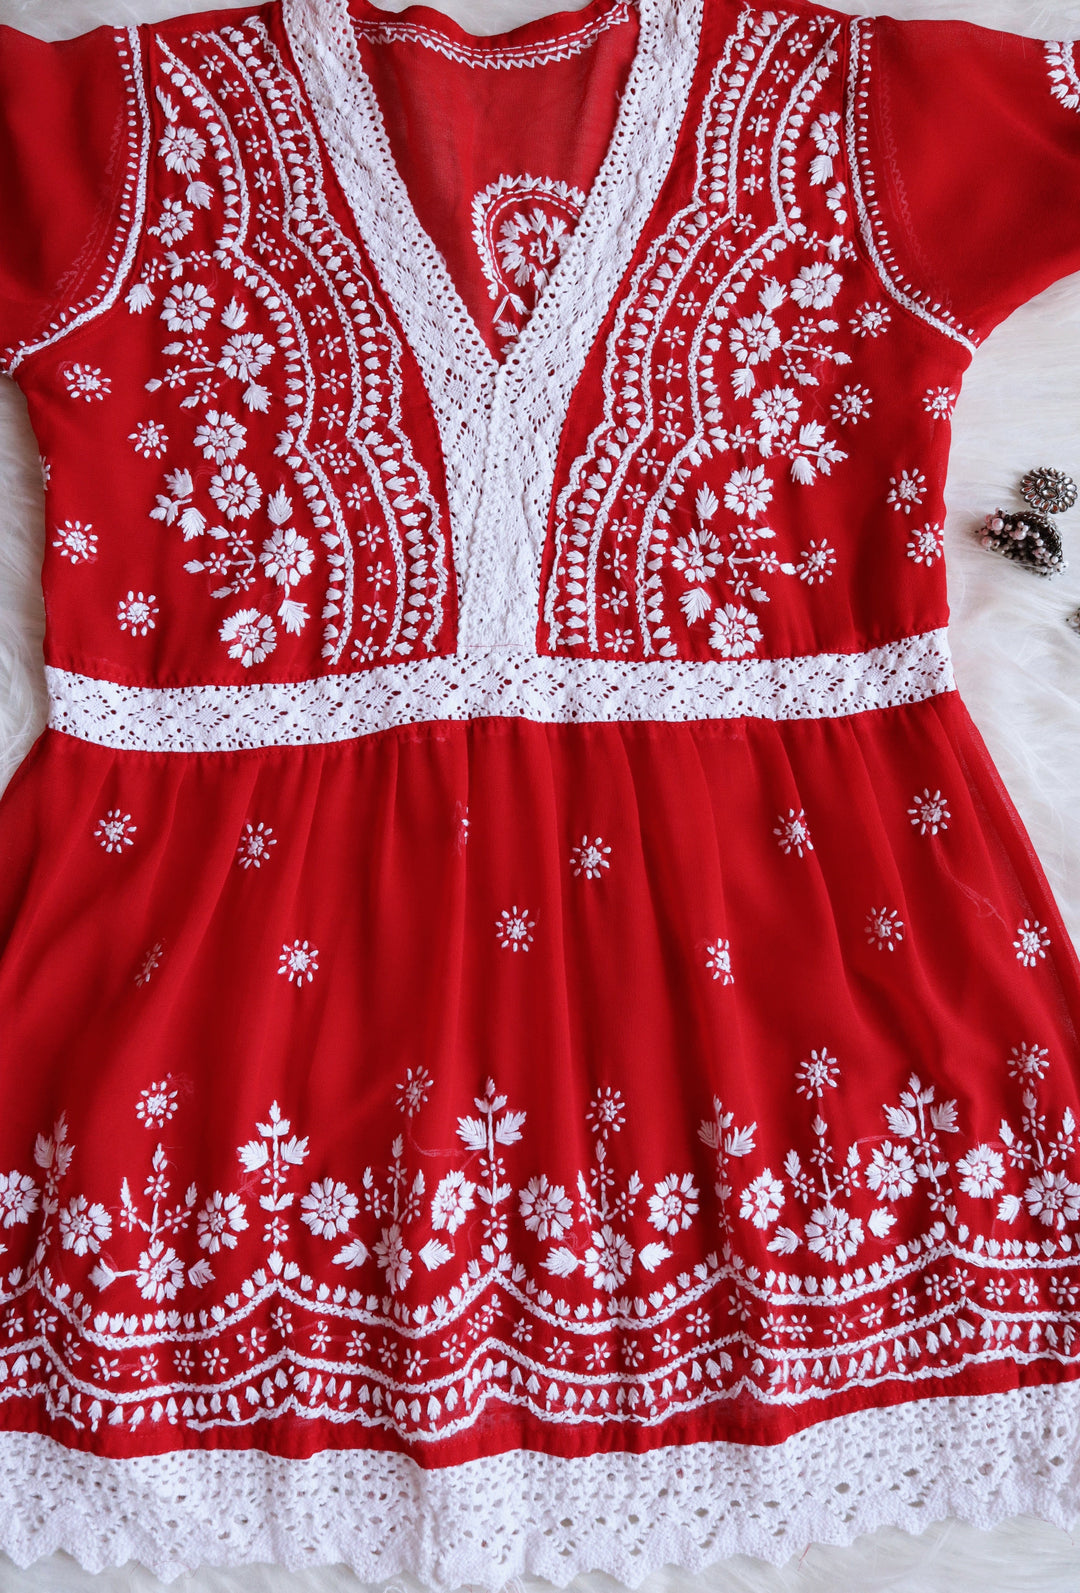 Red & White Lace Peplum Top